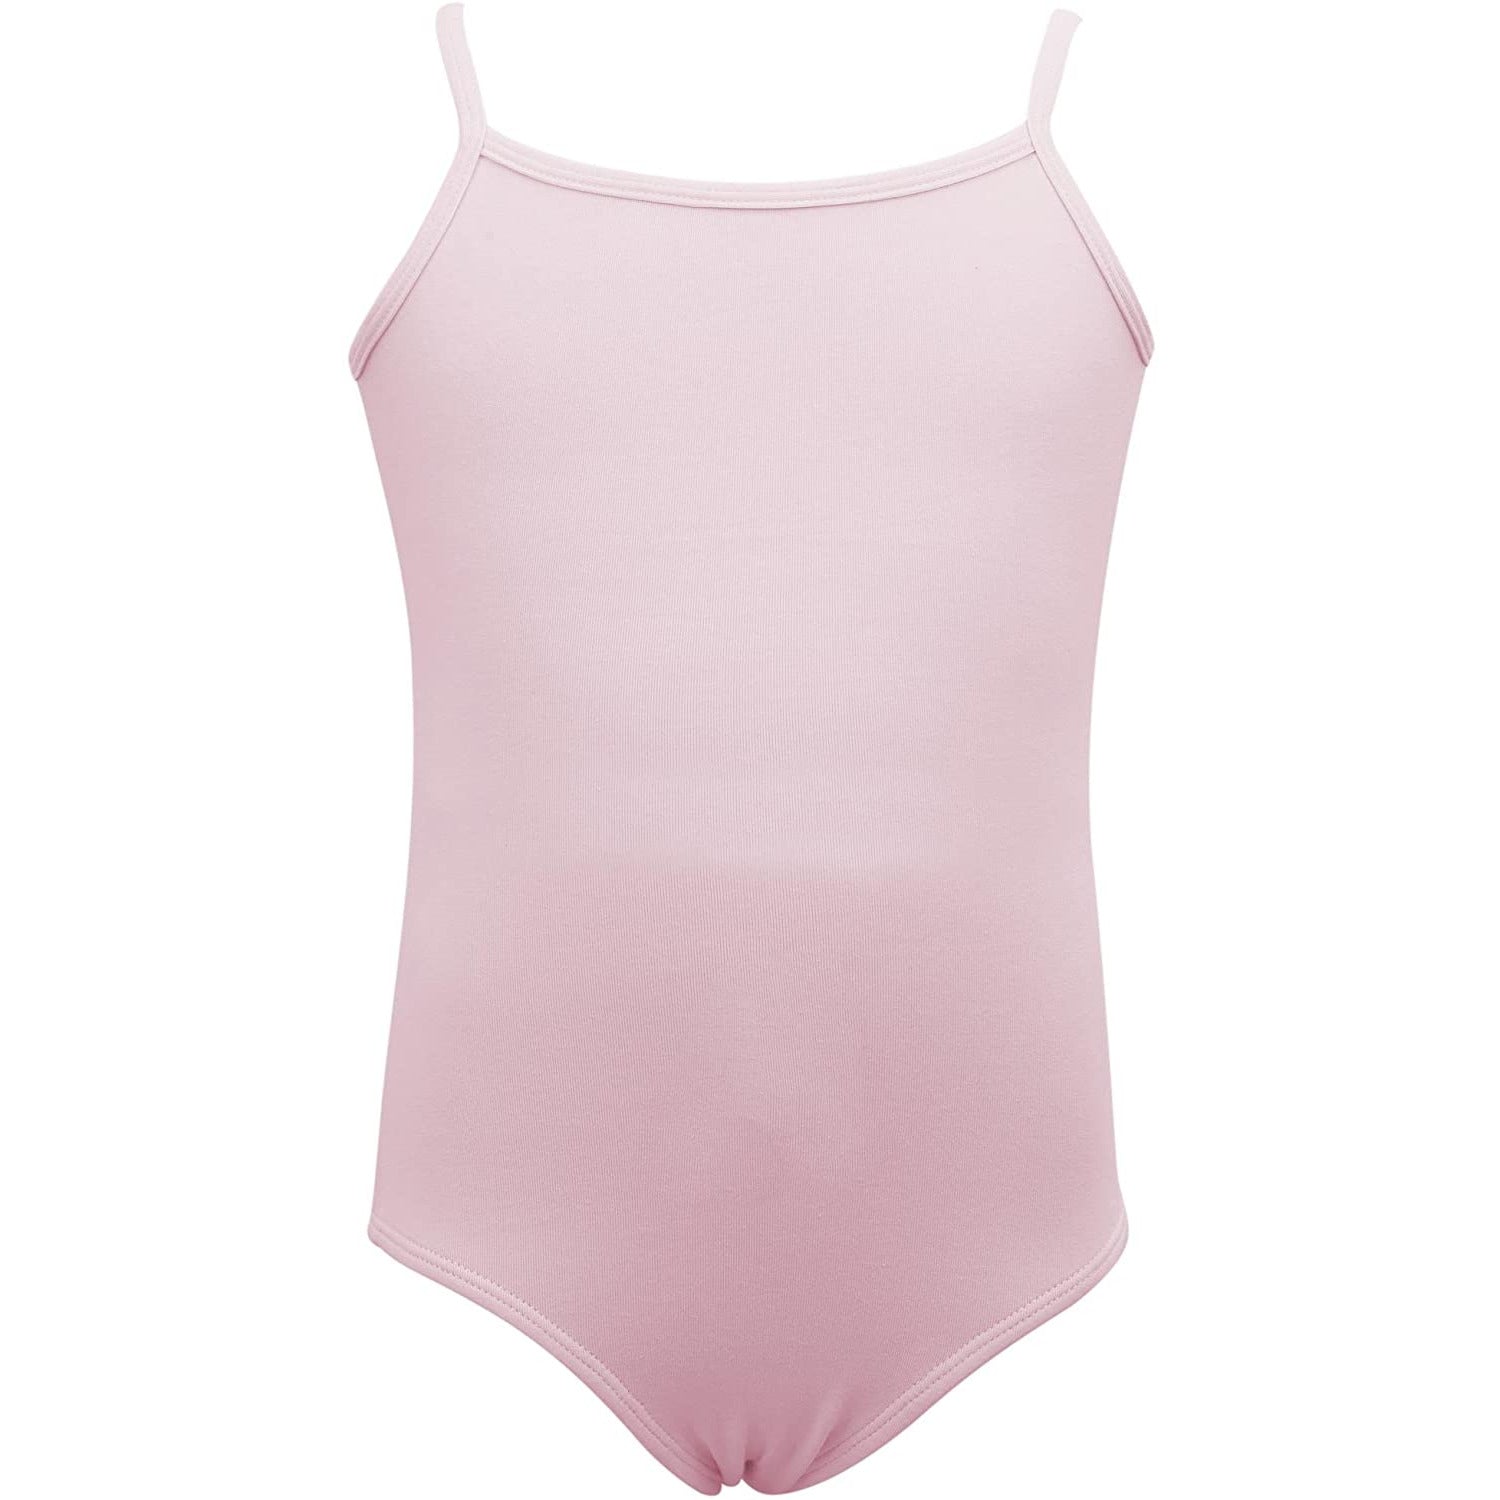 Dancina Cotton Camisole Leotard Camisole with Full Front Lining in Ballet Pink